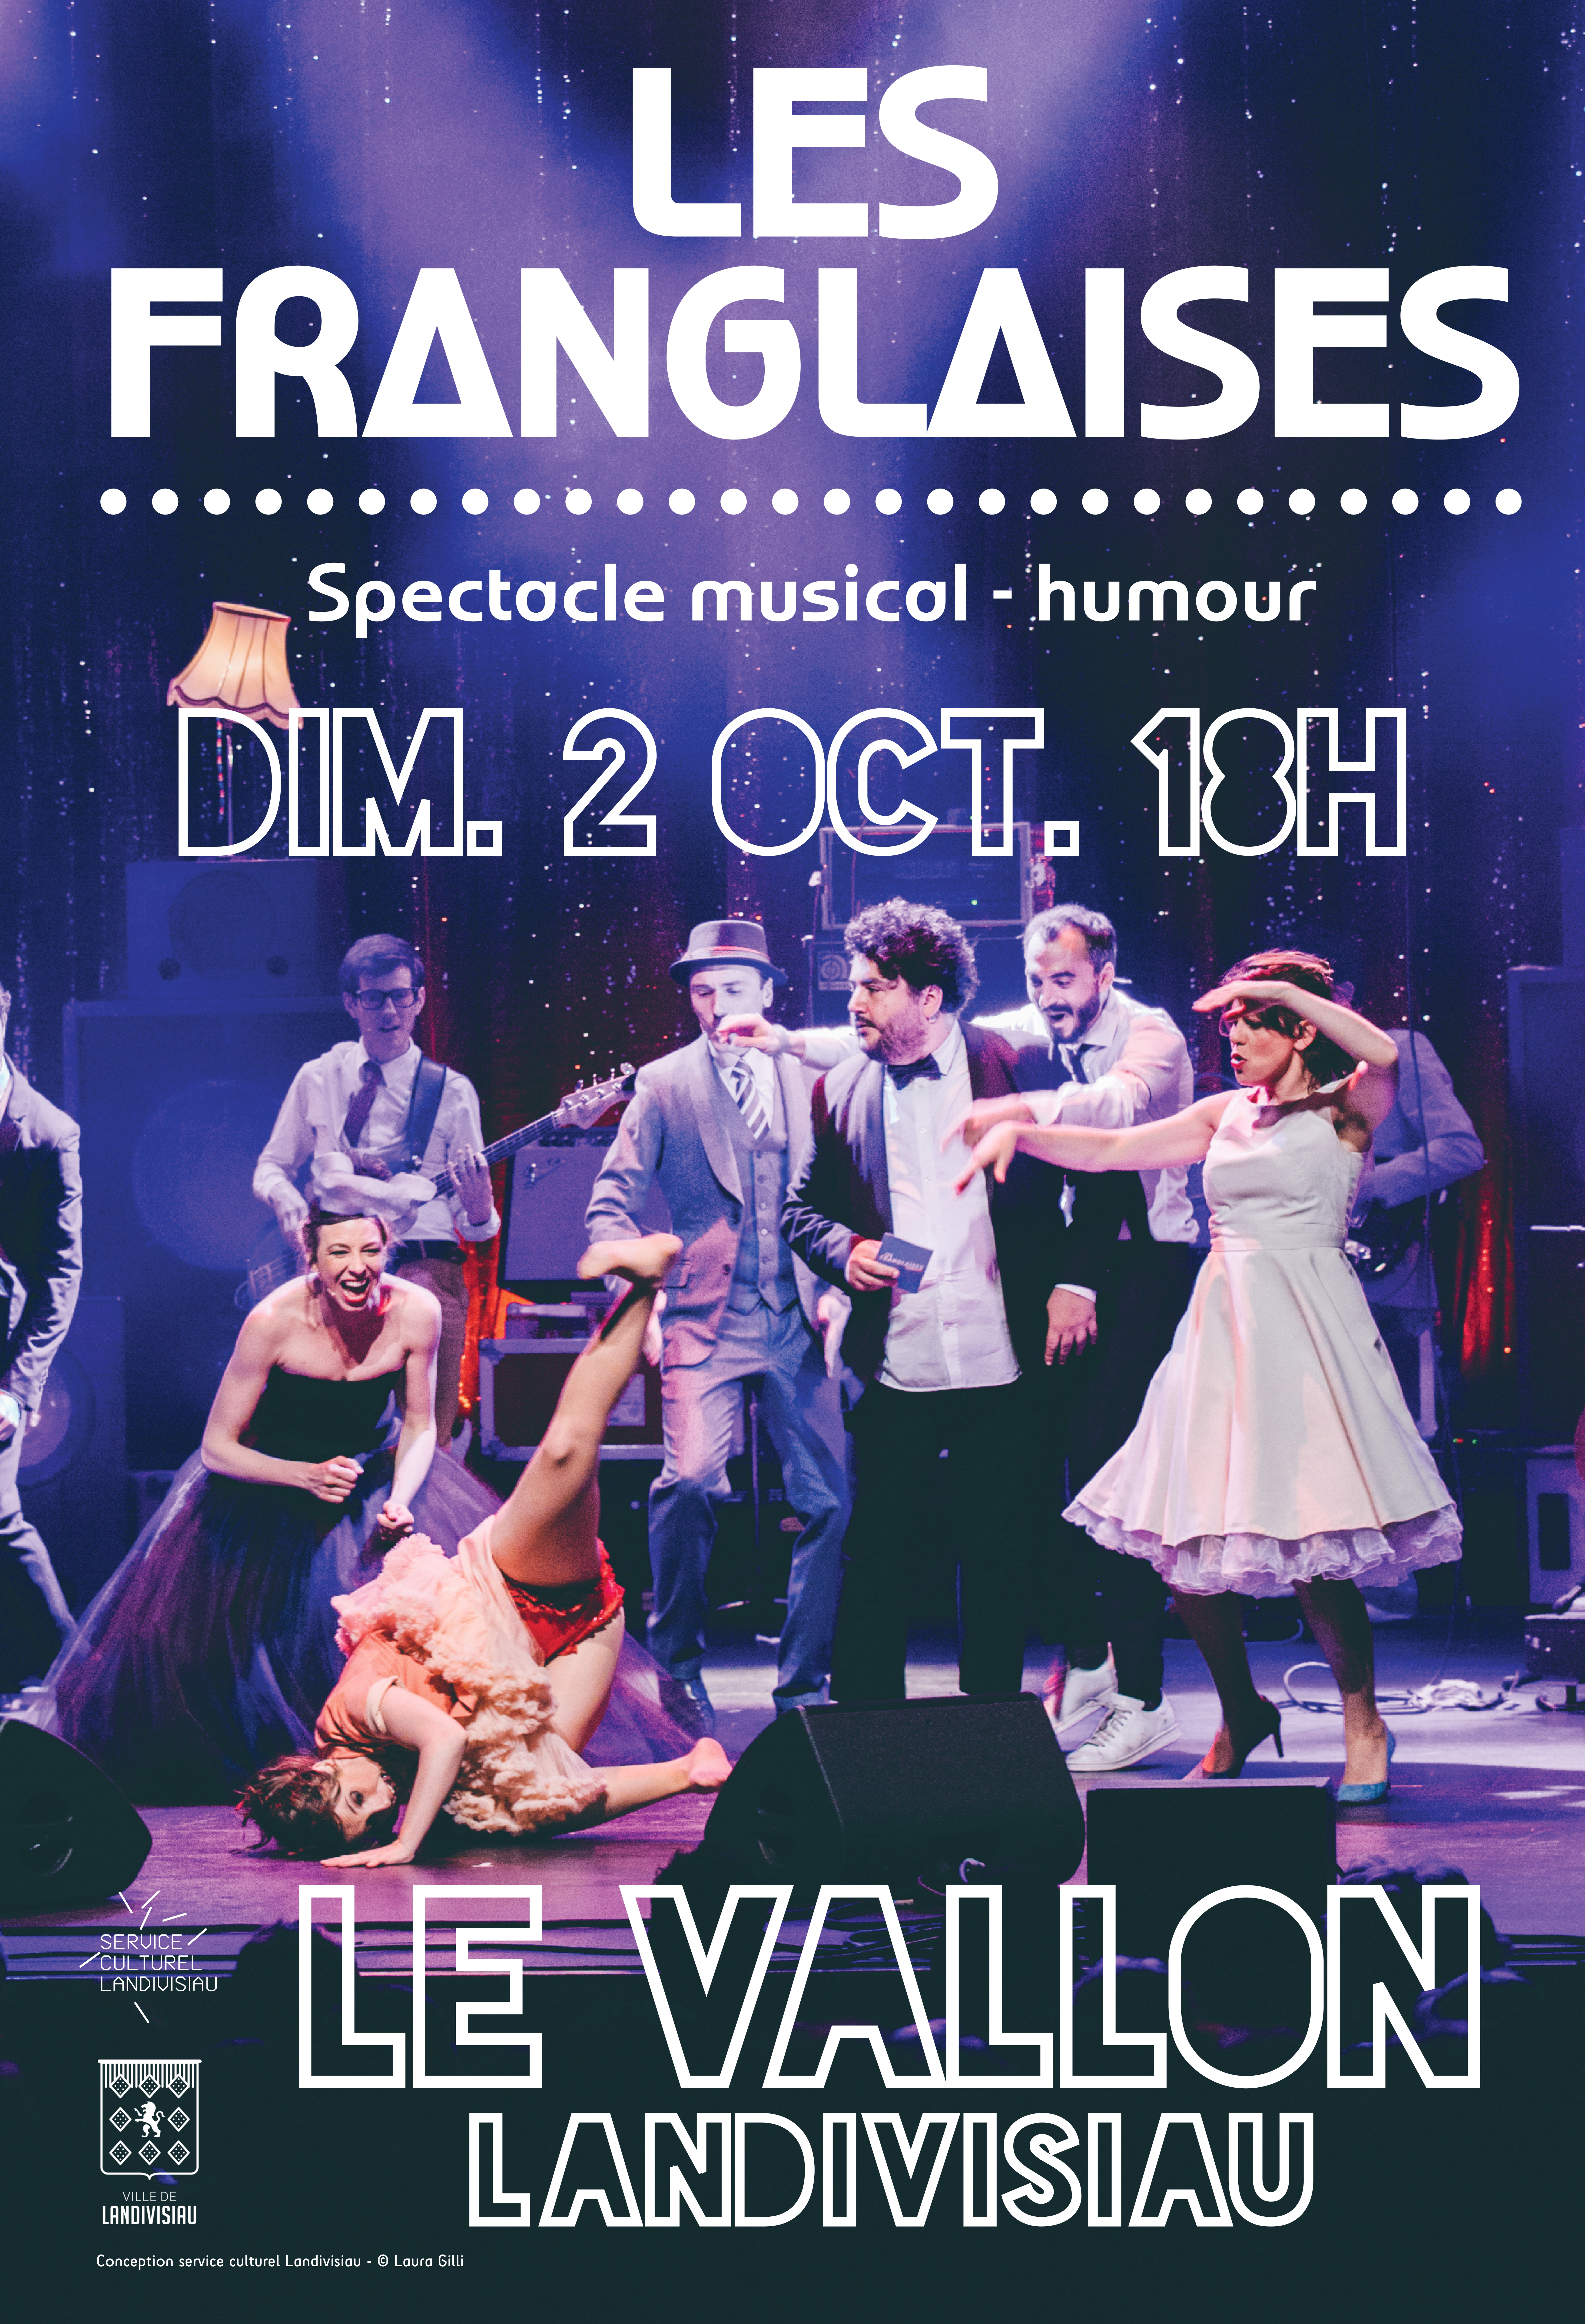 AFFICHE VEDIAUD FRANGLAISES_page-0001.jpg